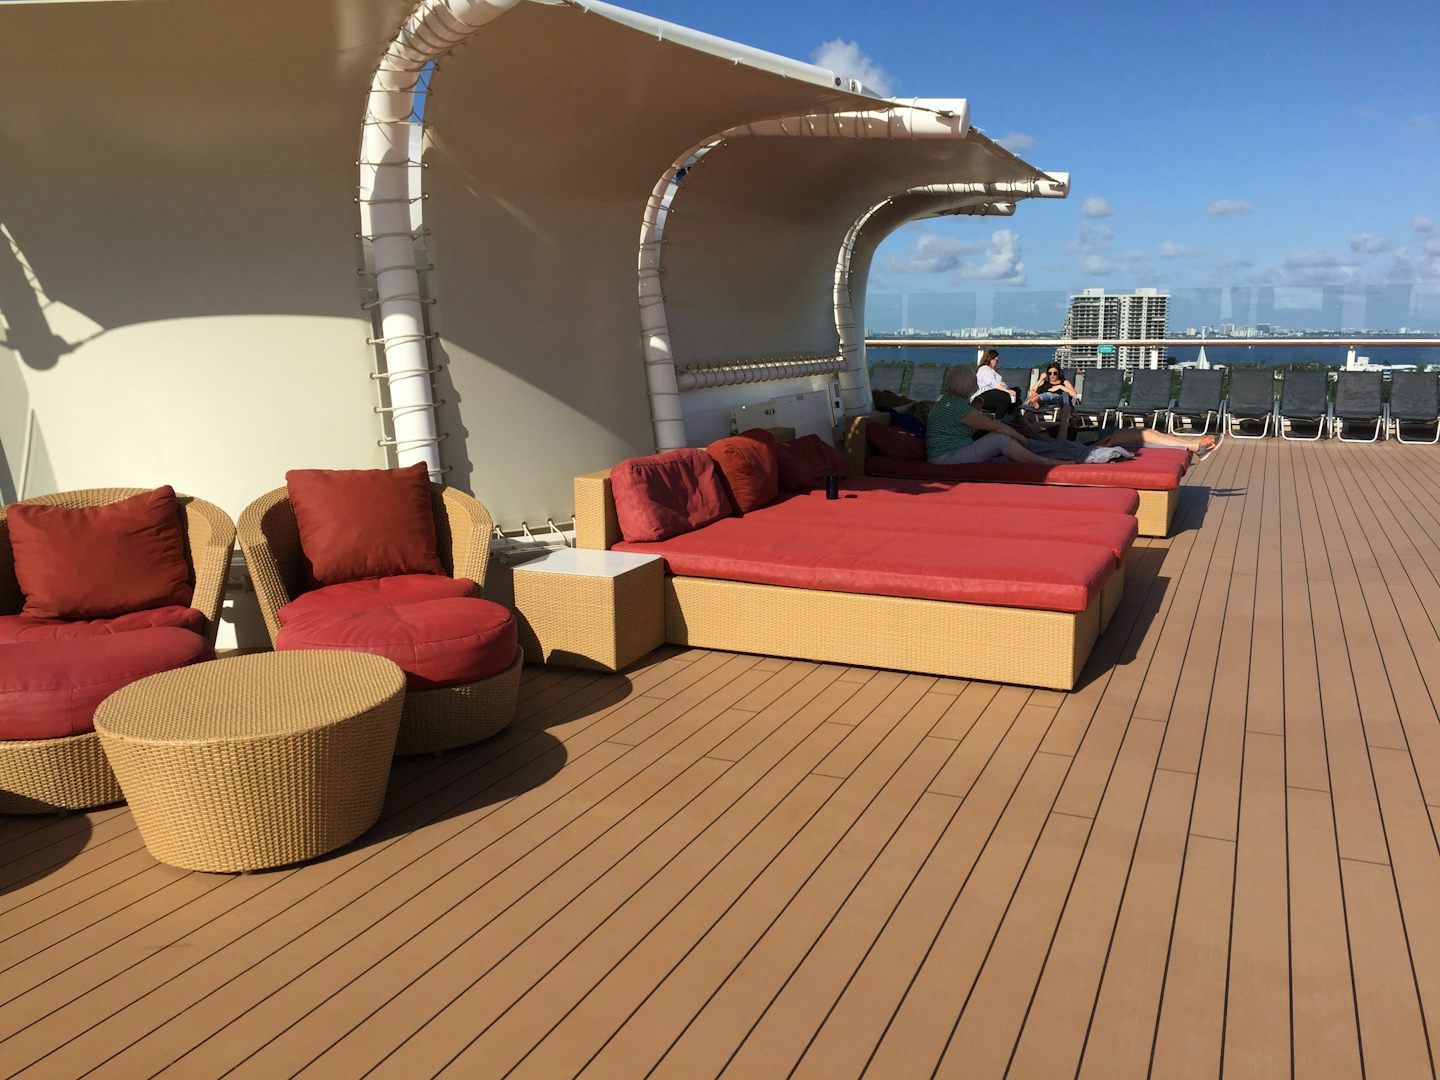 Solstice deck - the most peaceful open deck